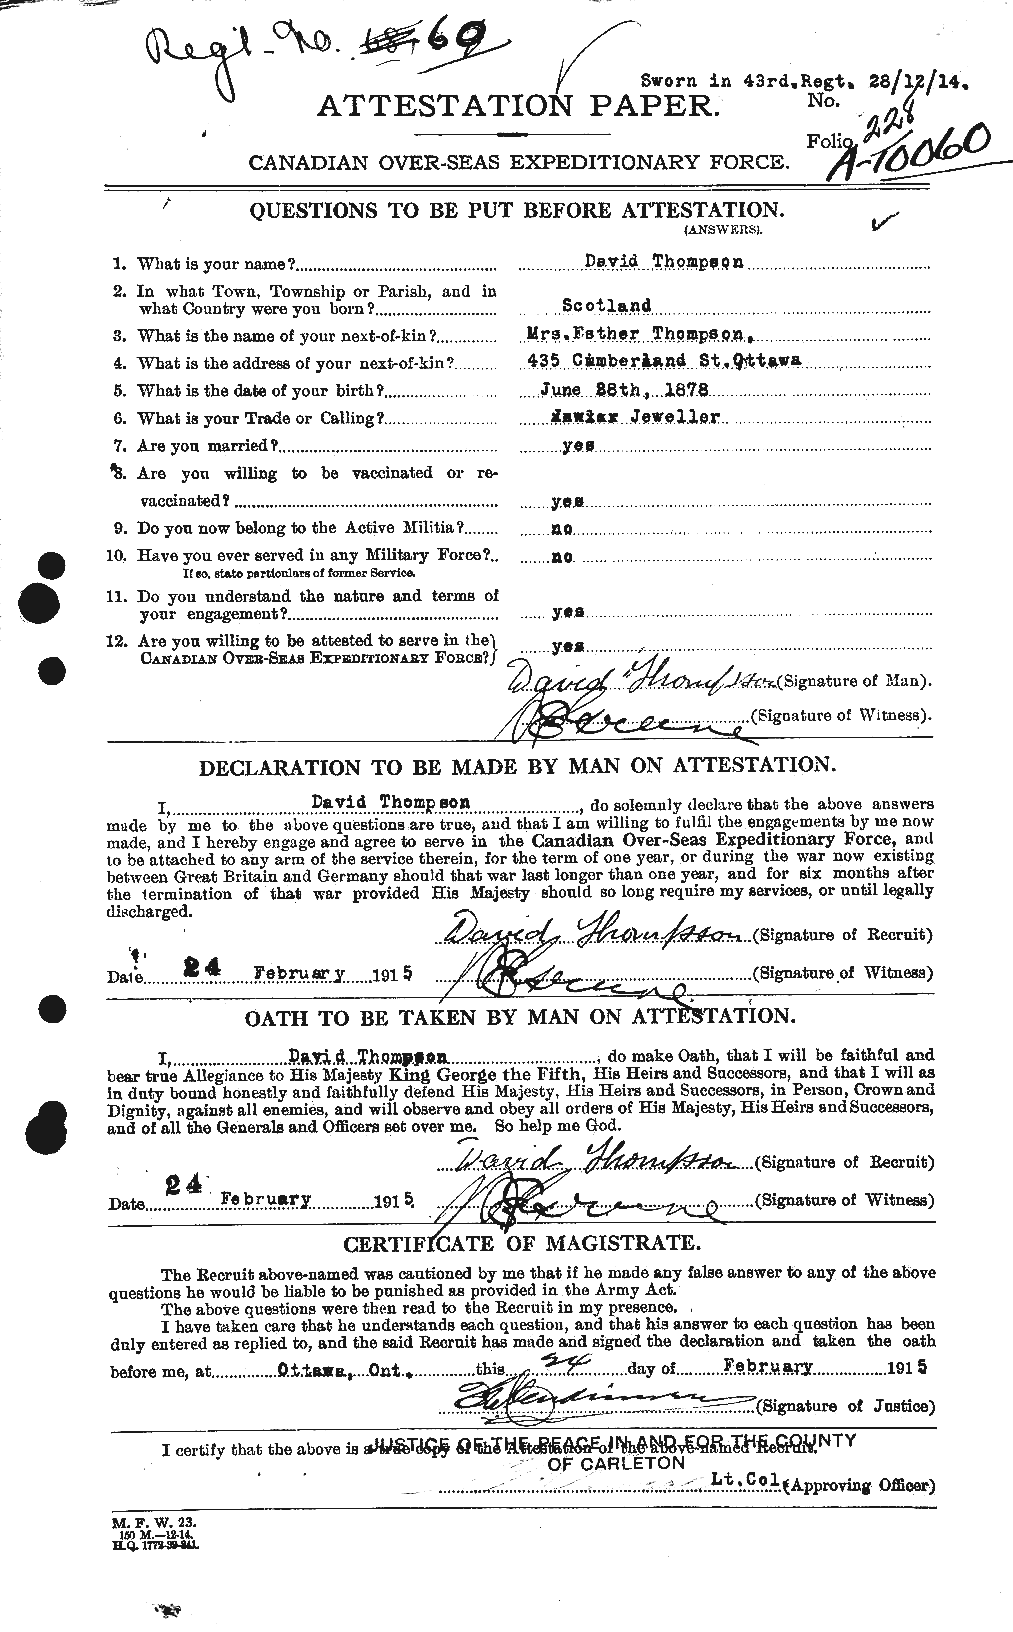 Personnel Records of the First World War - CEF 630498a